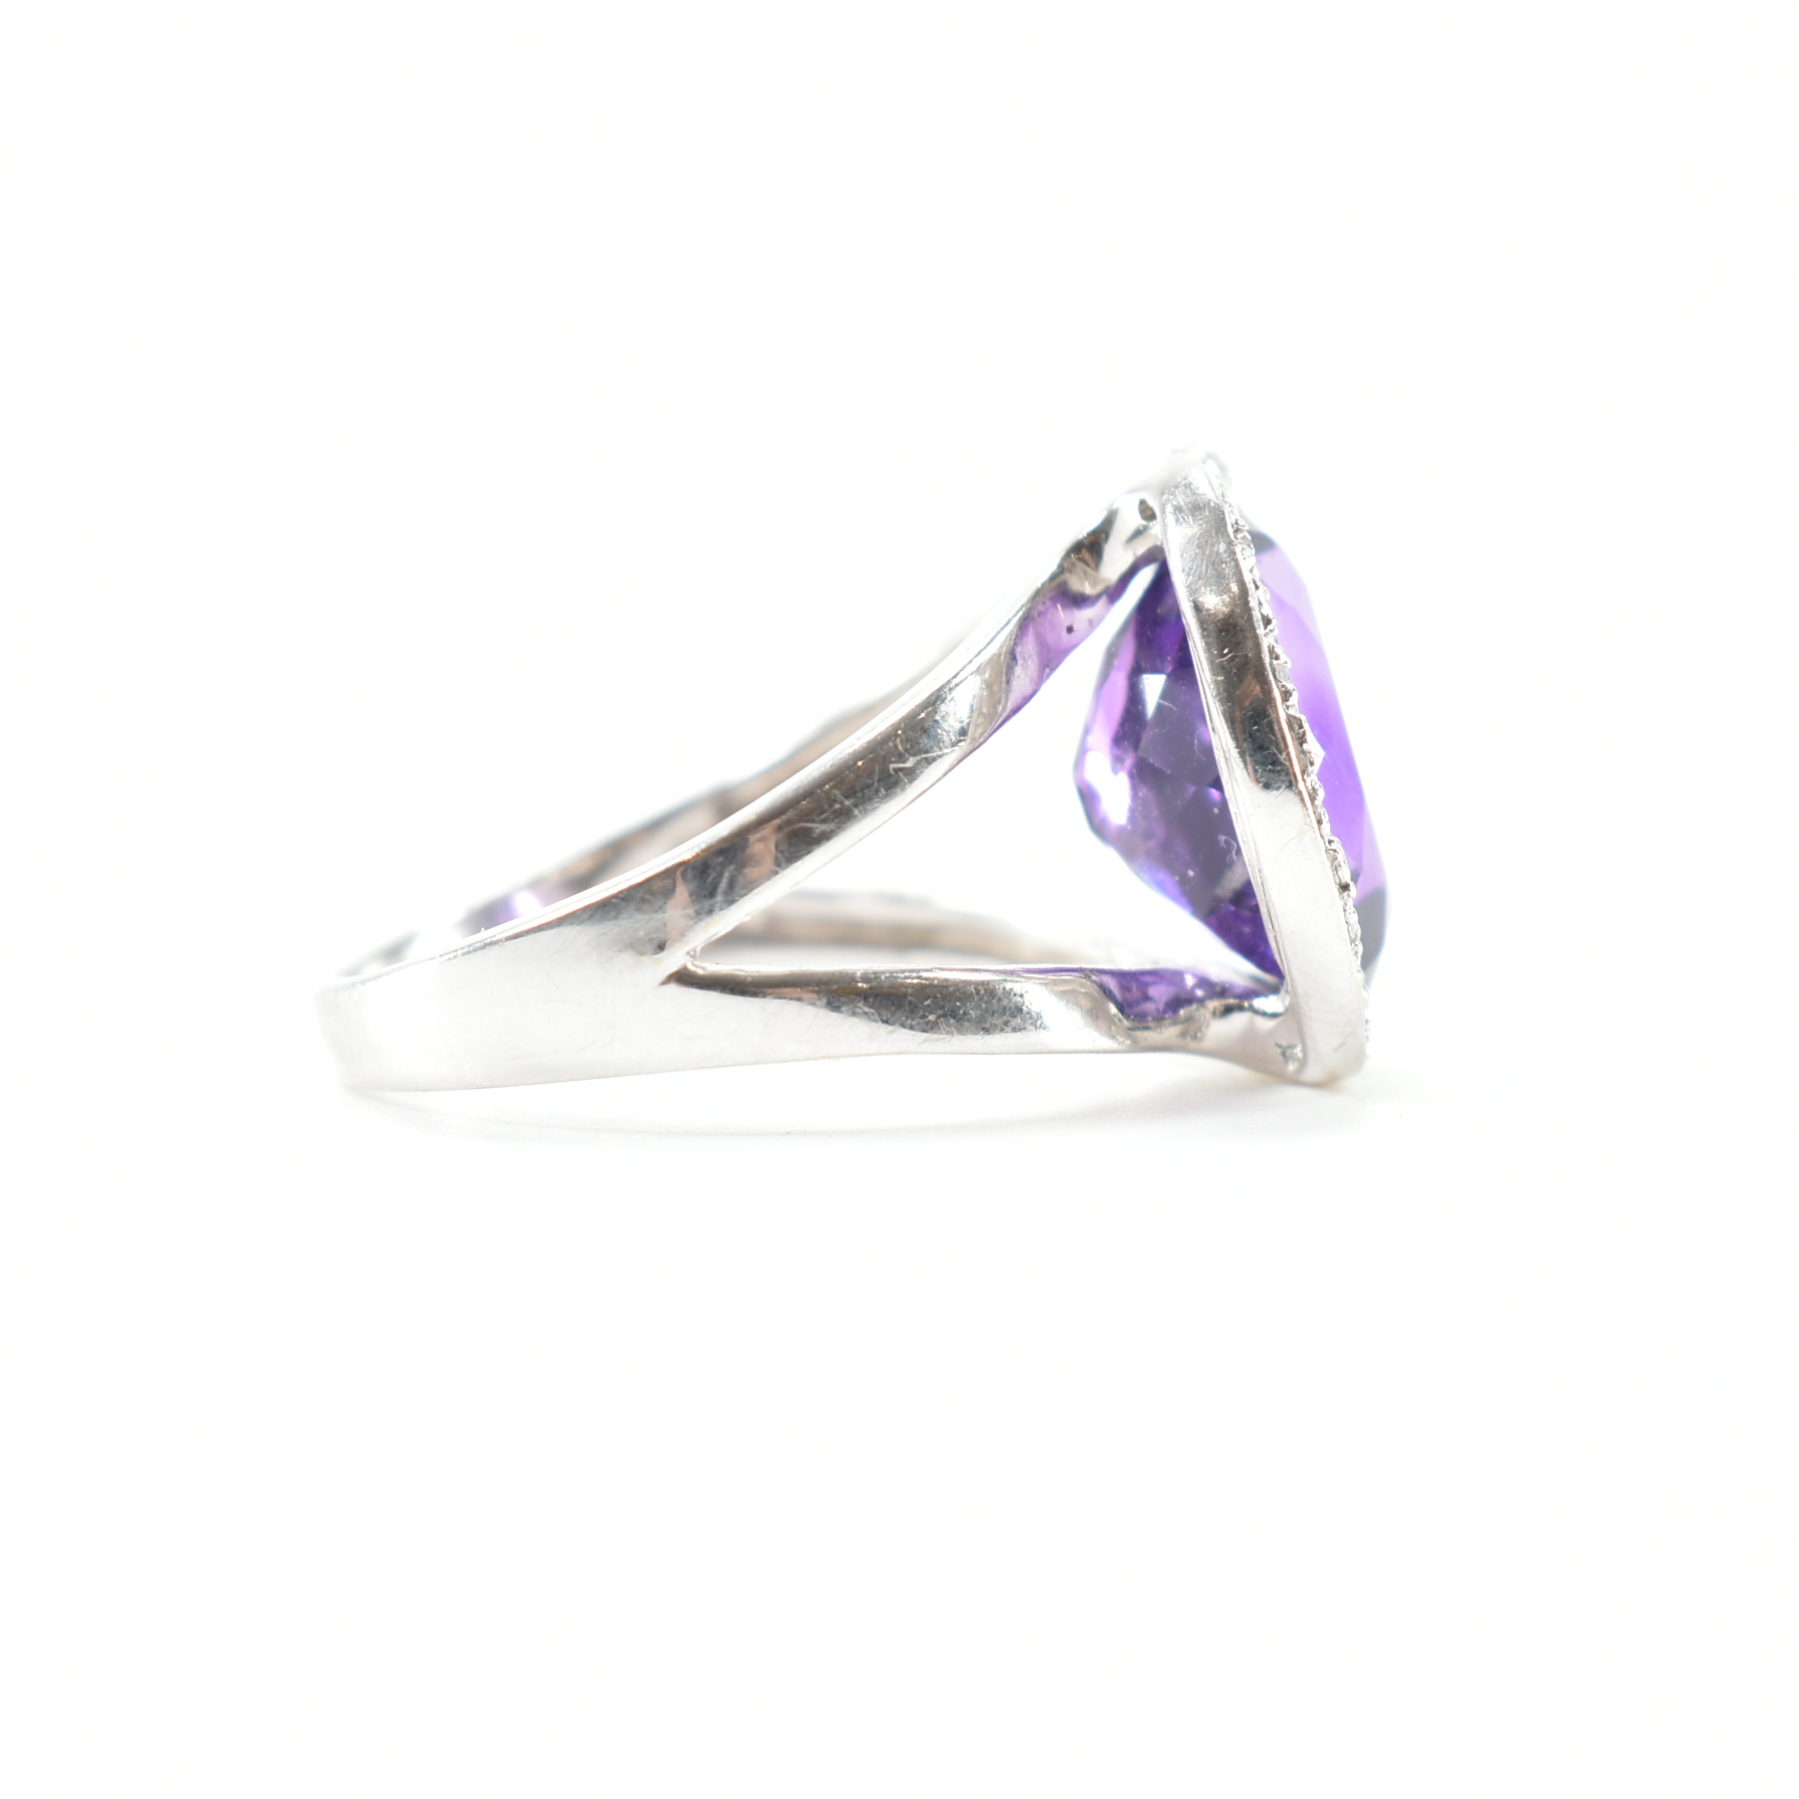 FRENCH 18CT WHITE GOLD AMETHYST & DIAMOND COCKTAIL RING - Image 5 of 9